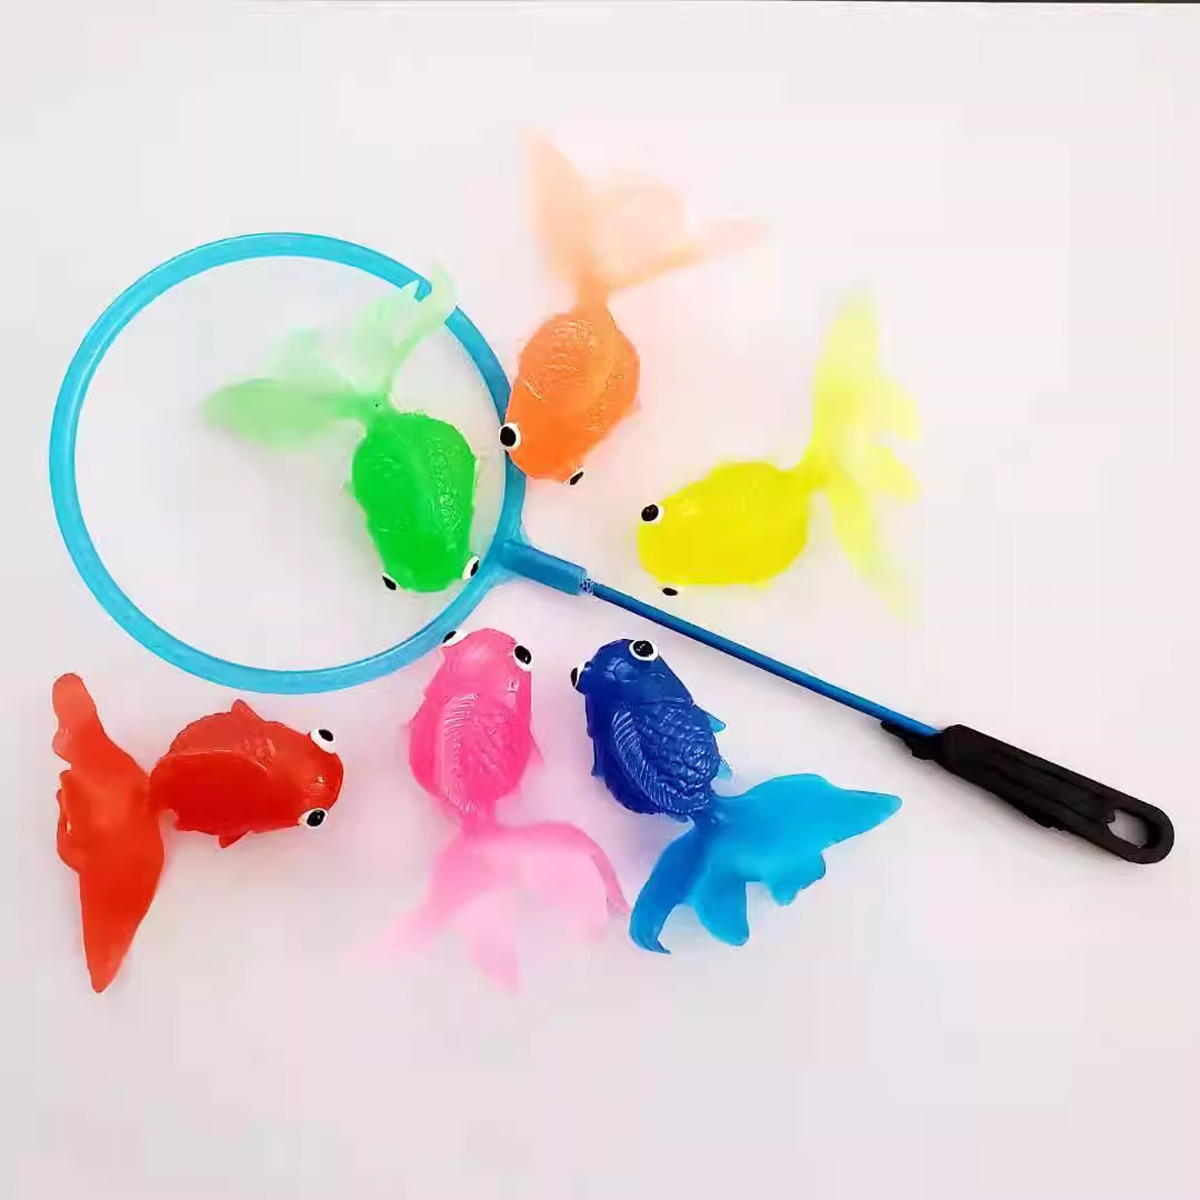 Shop Fish Hunting Toy online